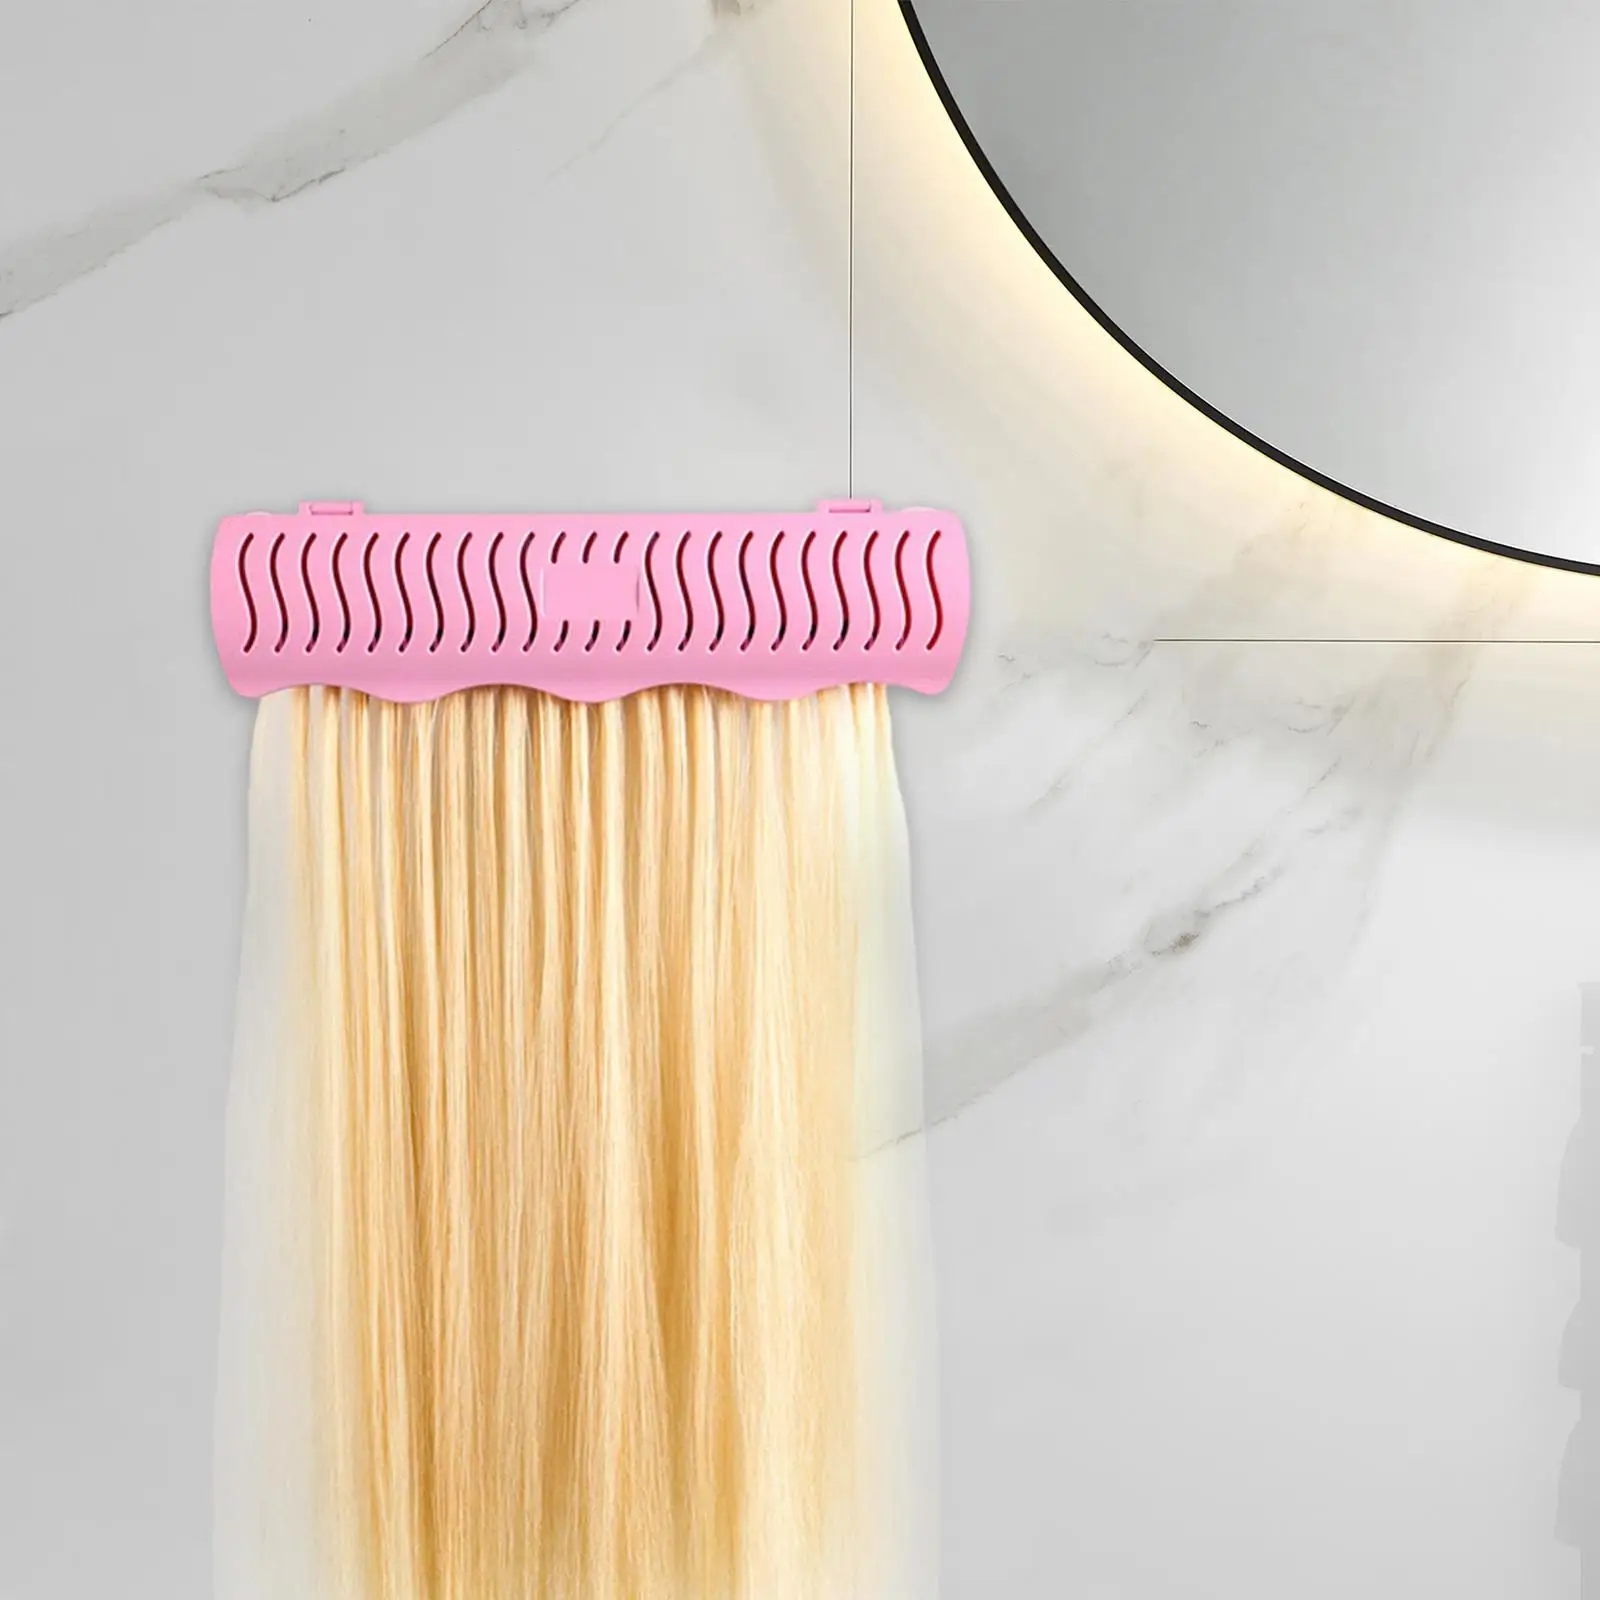 Professional Hair Extension Holder Hanger Barber Shop Use Organizer Stand for Color Wash Style